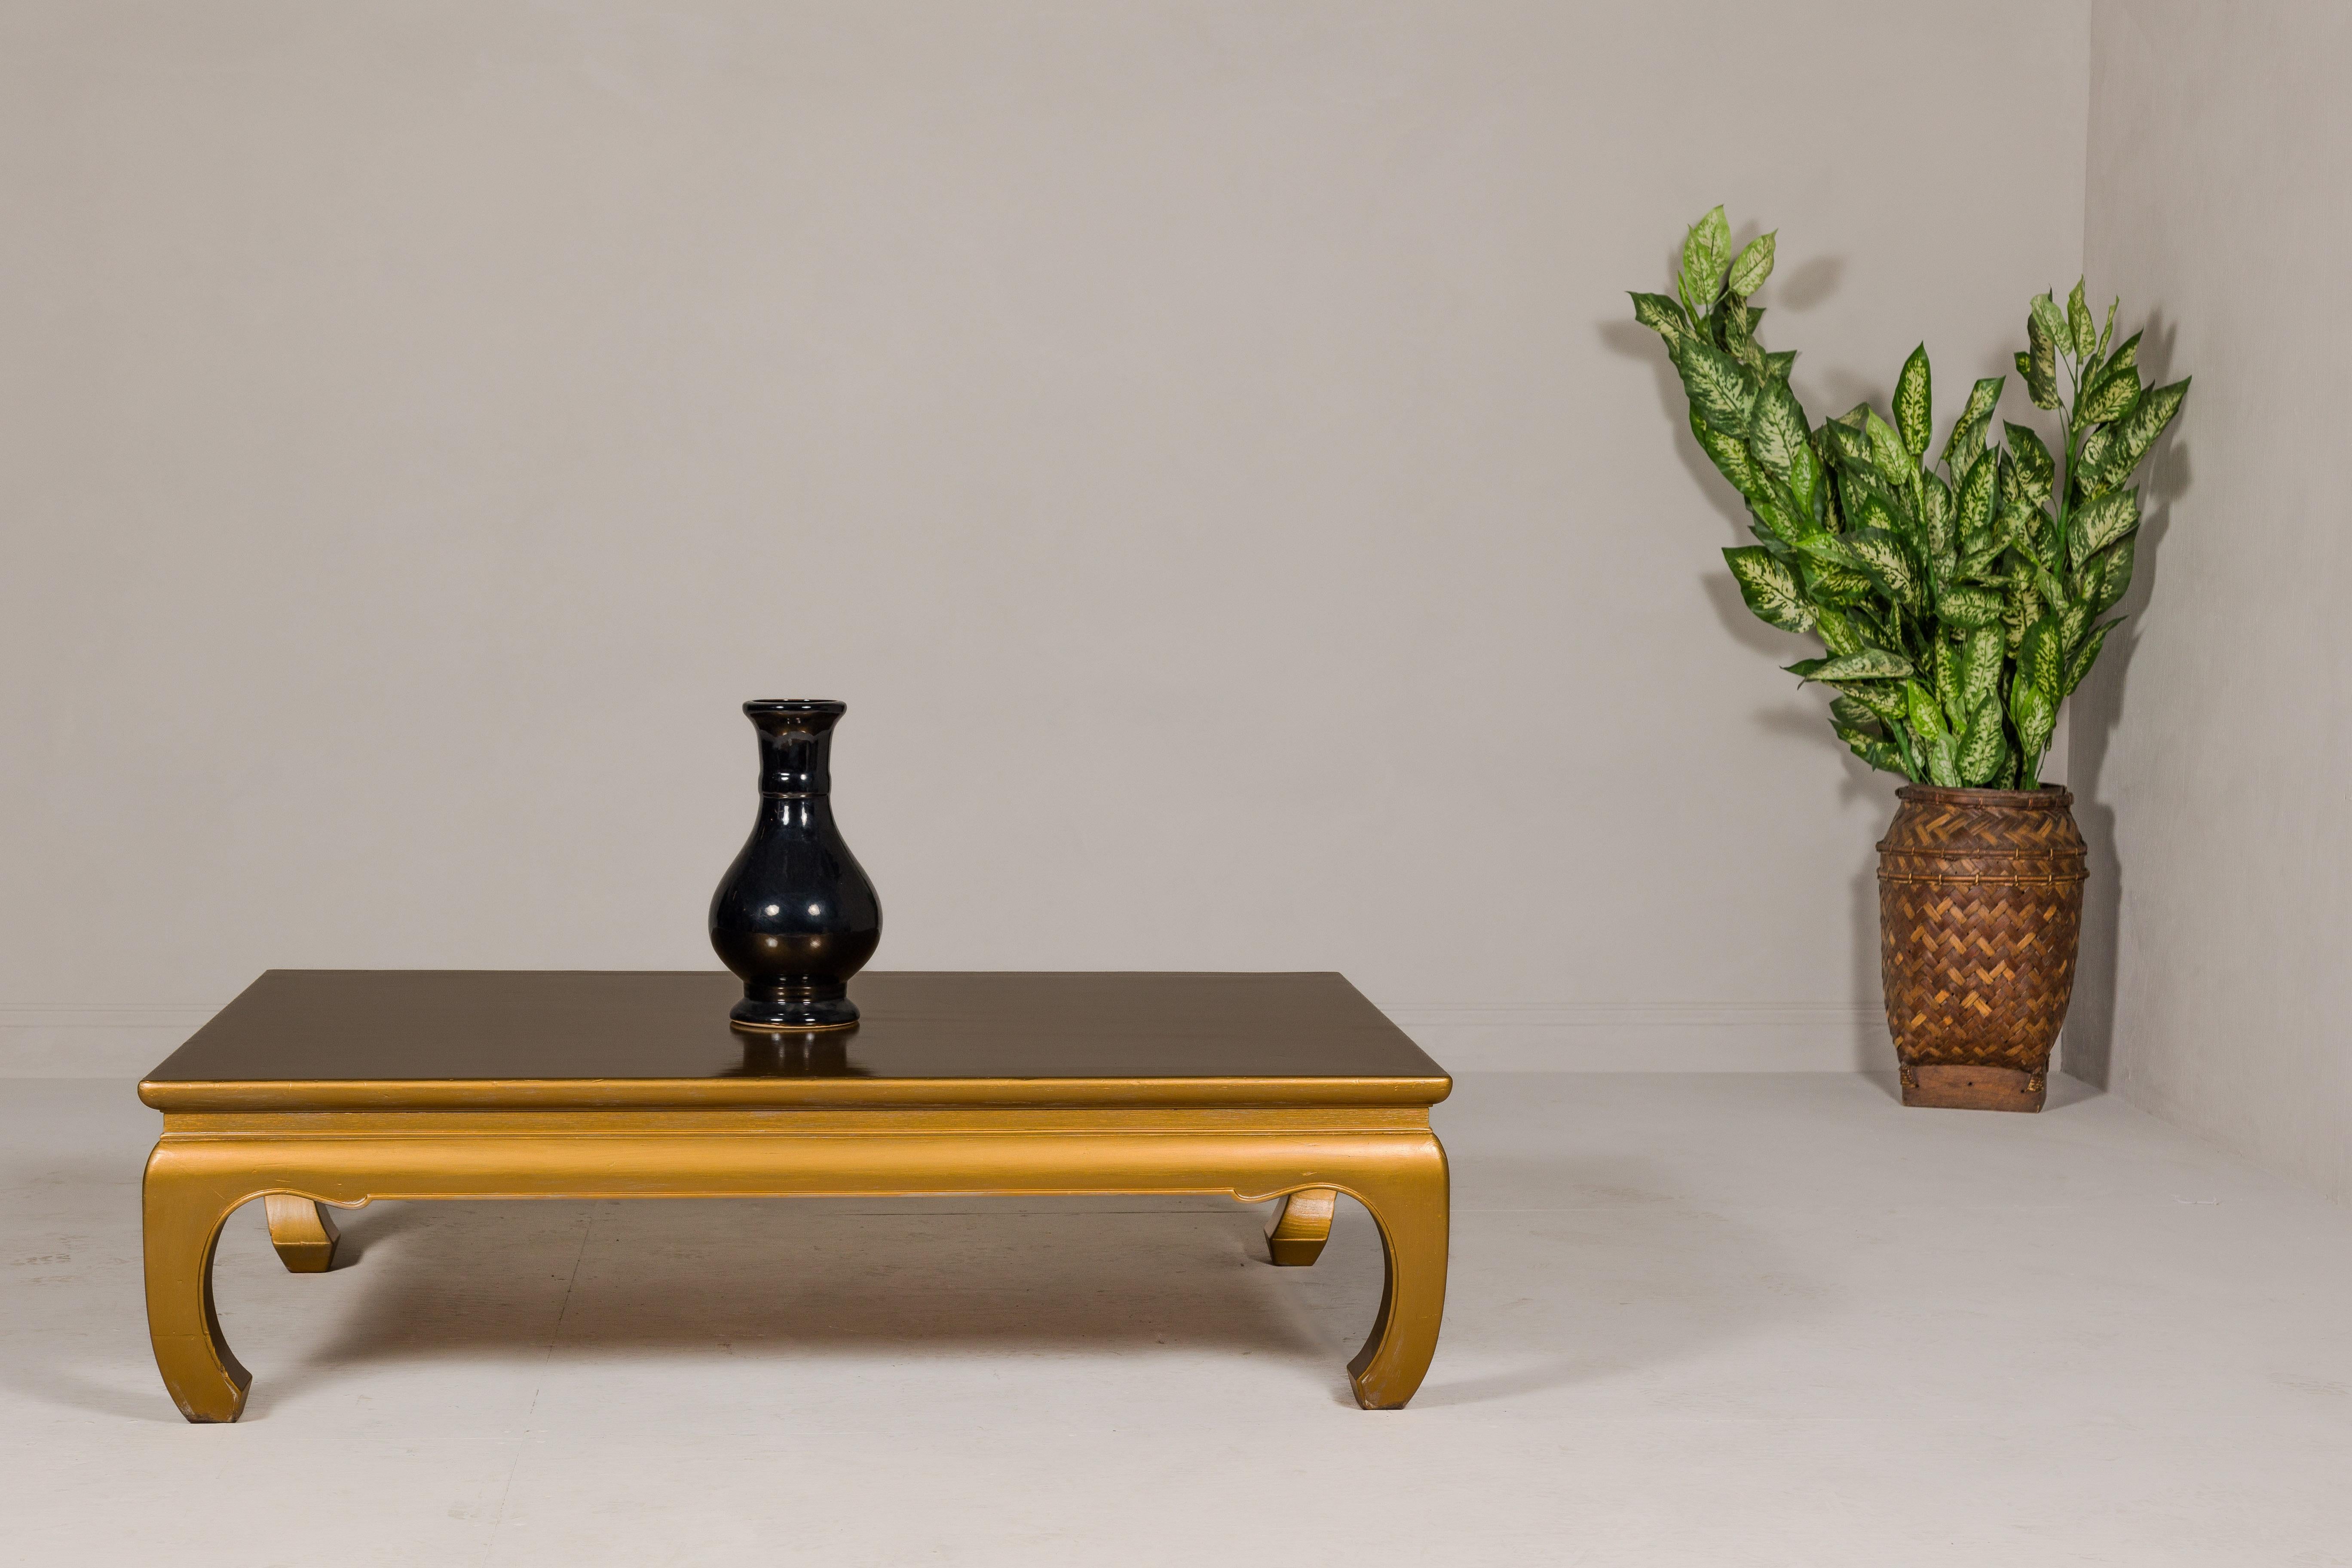 A Ming Dynasty style gold lacquered chow leg coffee table with carved apron. This vintage Ming Dynasty style coffee table, exquisitely refinished to highlight its historic charm, is a testament to the timeless elegance of Chinese furniture design.